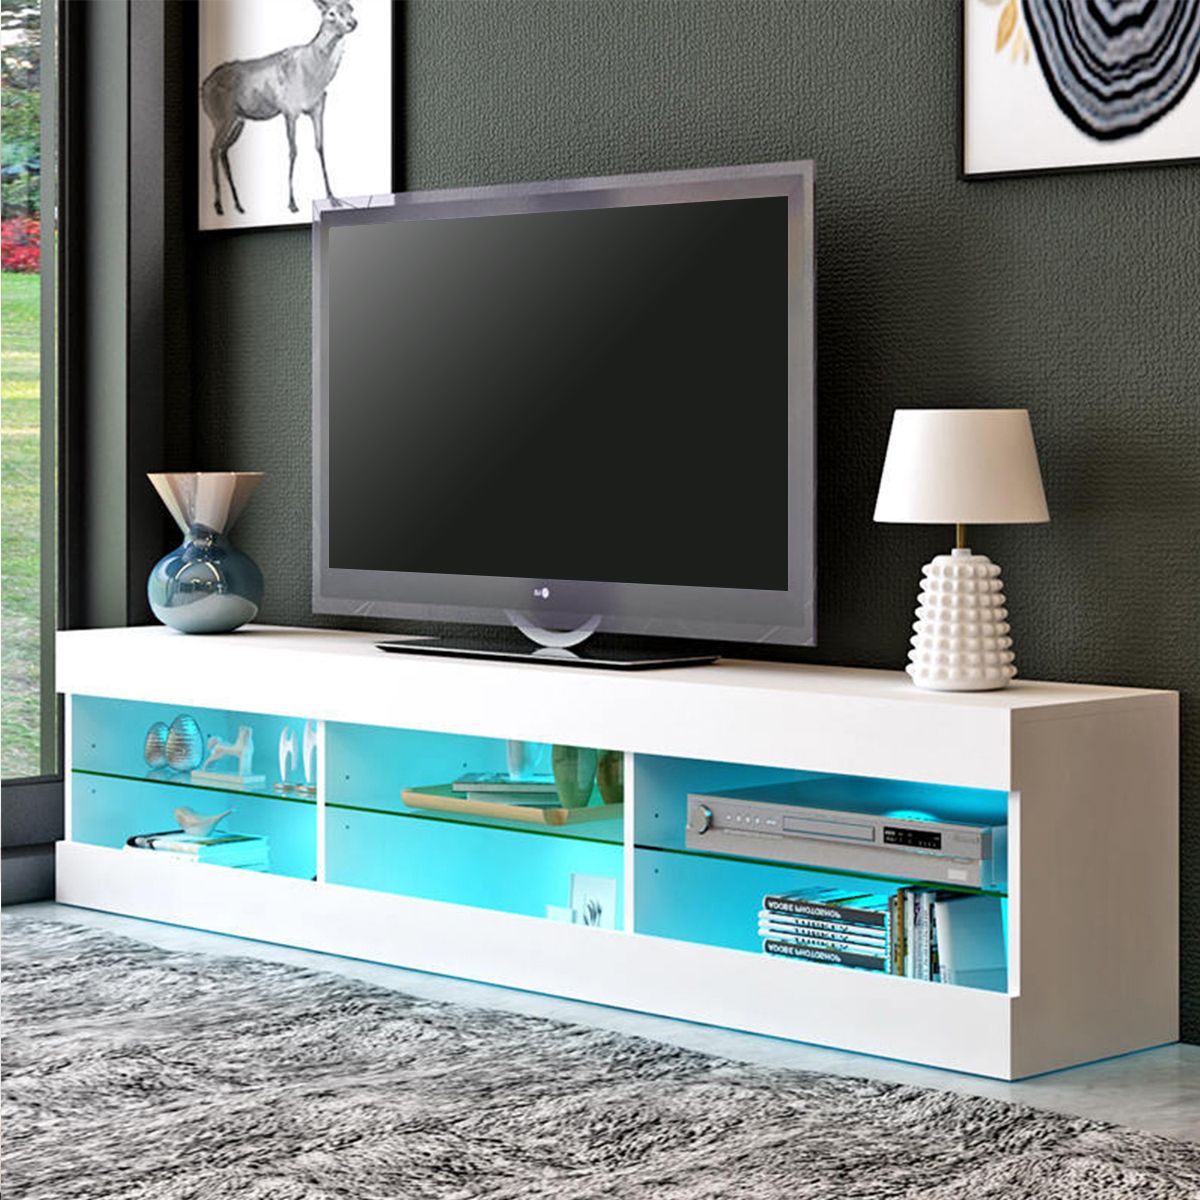 57'' Tv Stand With Rgb Led Lights, Modern Decorative Tv Intended For Glass Shelf With Tv Stands (View 2 of 15)